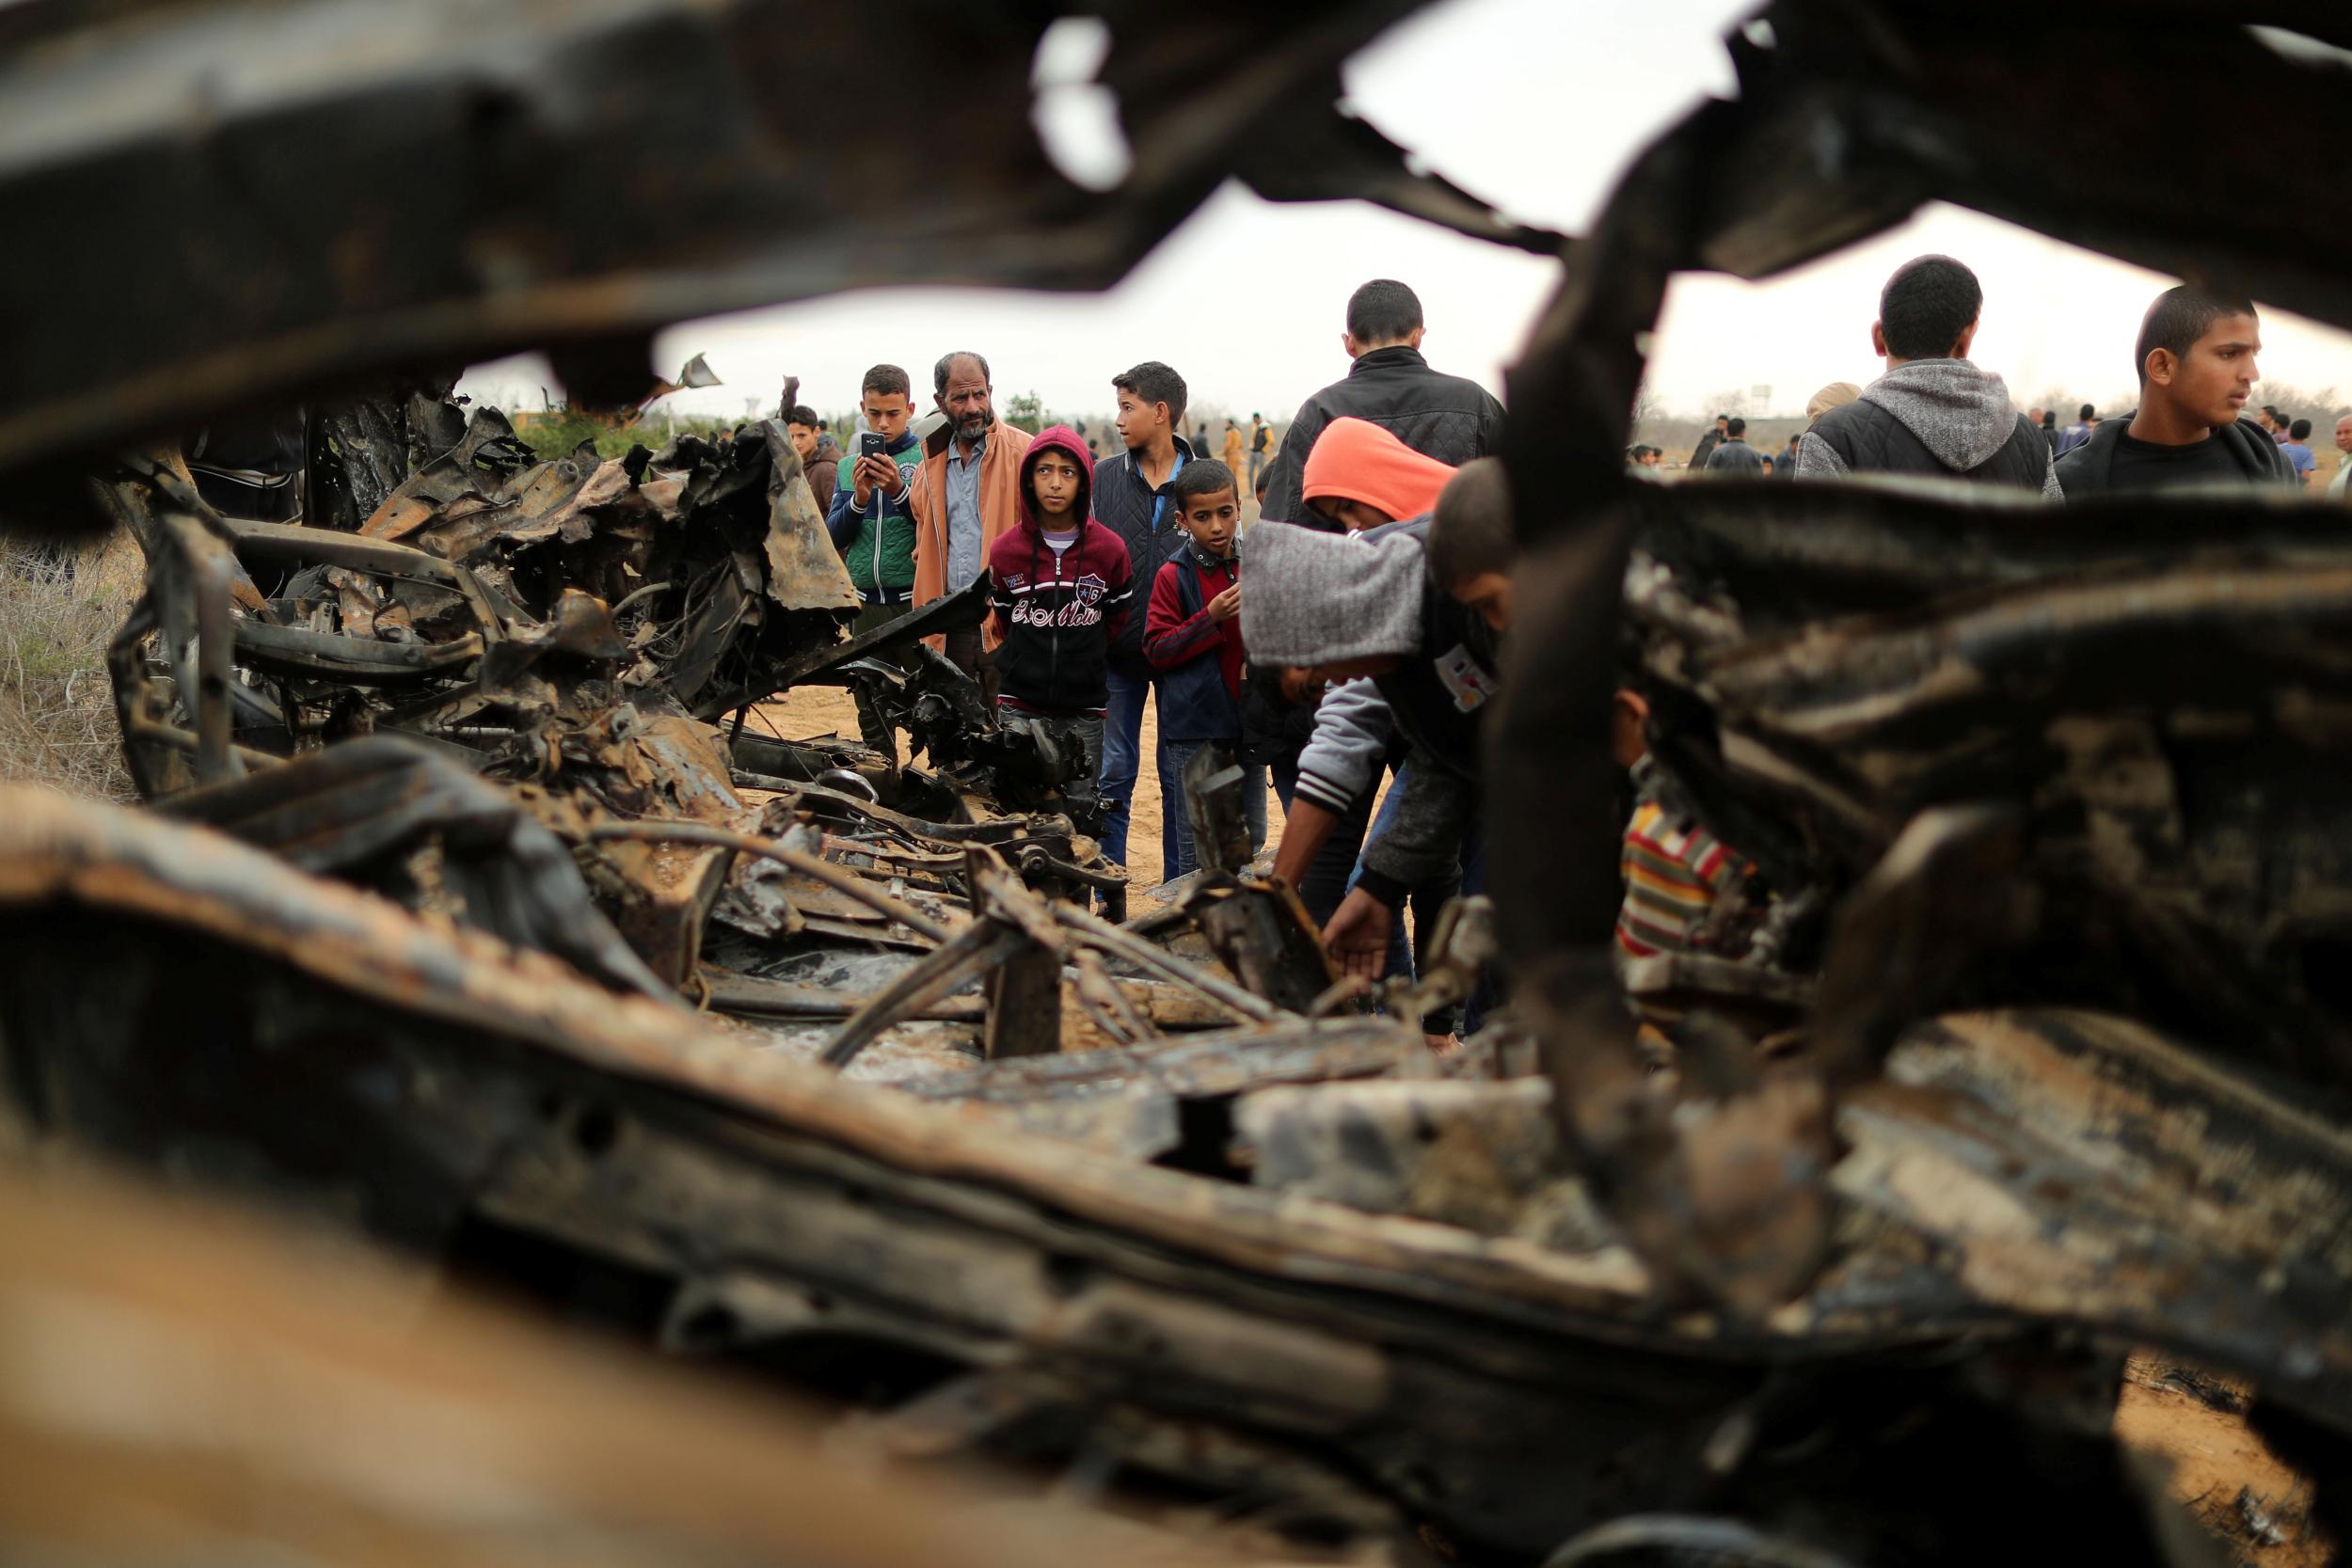 Palestinians gather around the remains of a vehicle that was destroyed in an Israeli air strike, in Khan Younis in the southern Gaza Strip